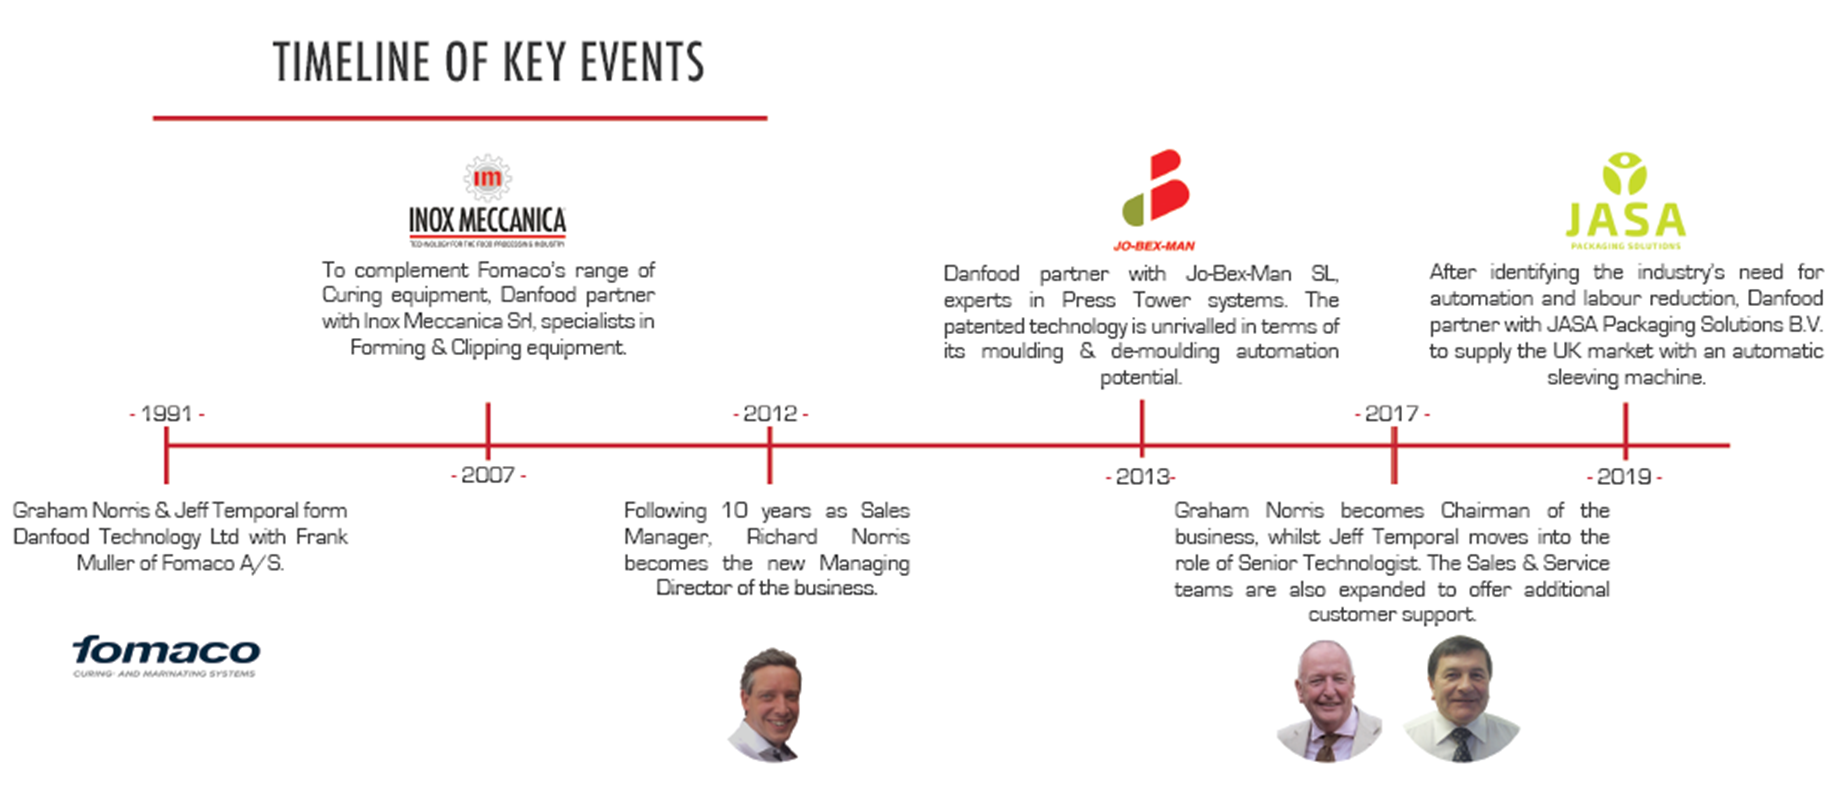 A timeline of key events that have helped shape DanFood Technology from its launch in 1991.